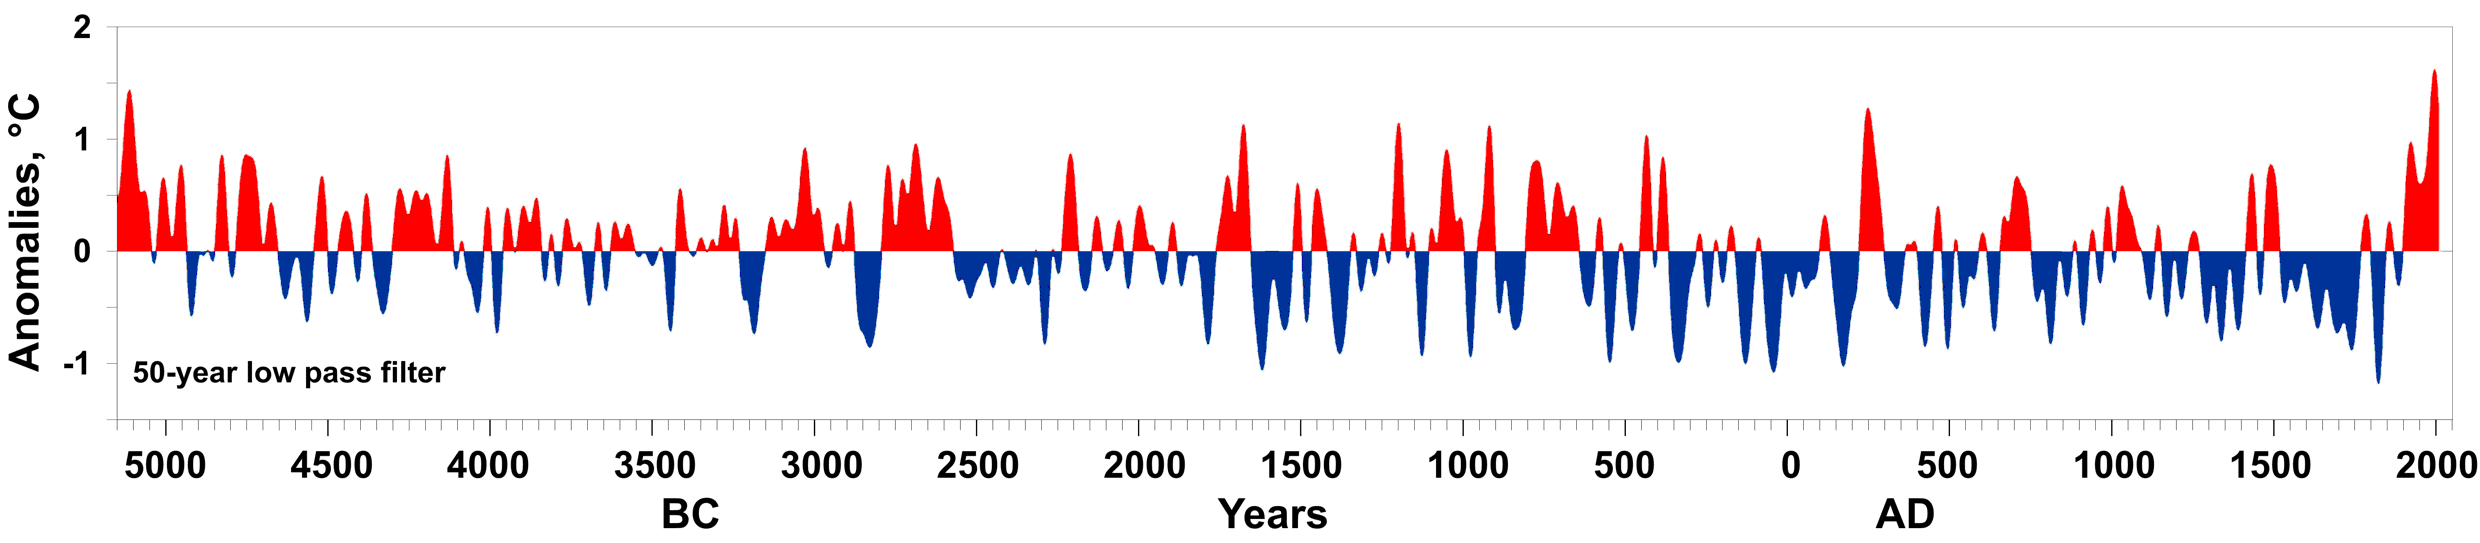 Graph of tree ring data: the horizontal axis is labeled Years and spans 5000 BC to 2000 AD; the vertical axis is labeled Anomalies, degrees C, and spans -1 degree Celsius to positive 2 degrees Celsius. Highs and lows fluctuate cyclically throughout time around the 0 degrees celsius line and the last few hundred years are slightly higher temperatures than earlier highs.